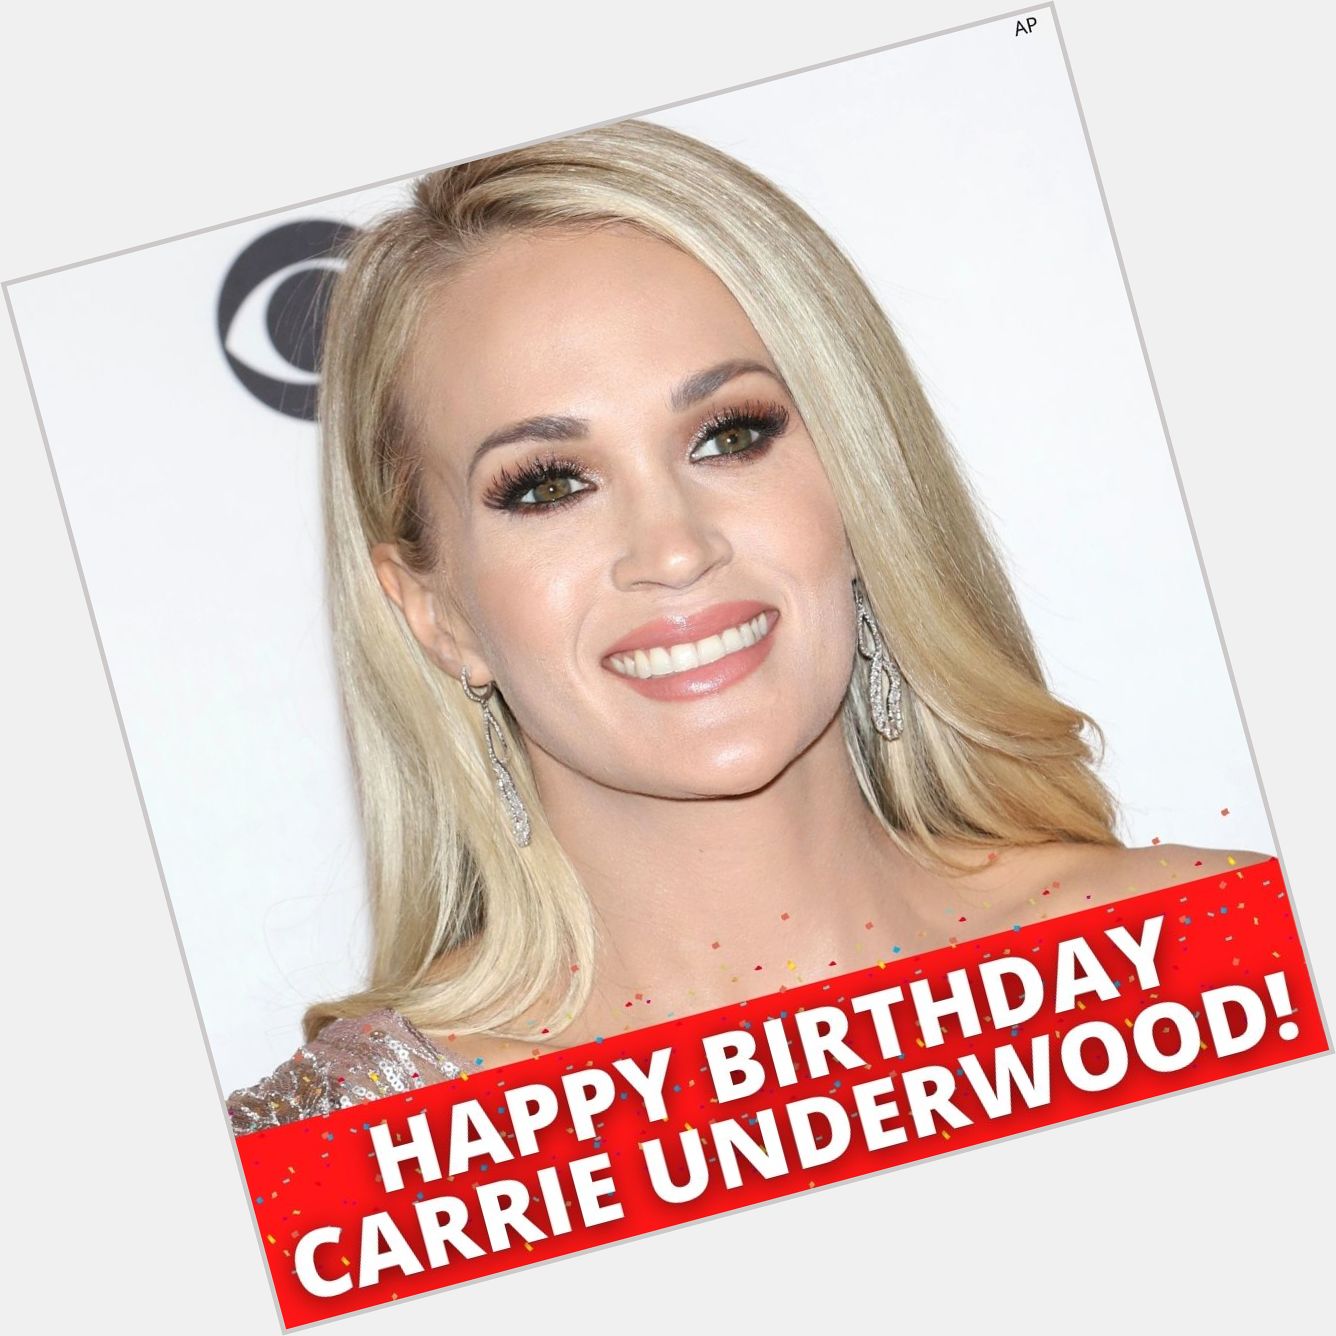 Happy birthday Carrie Underwood!

The country music star is celebrating her 38th birthday today! 